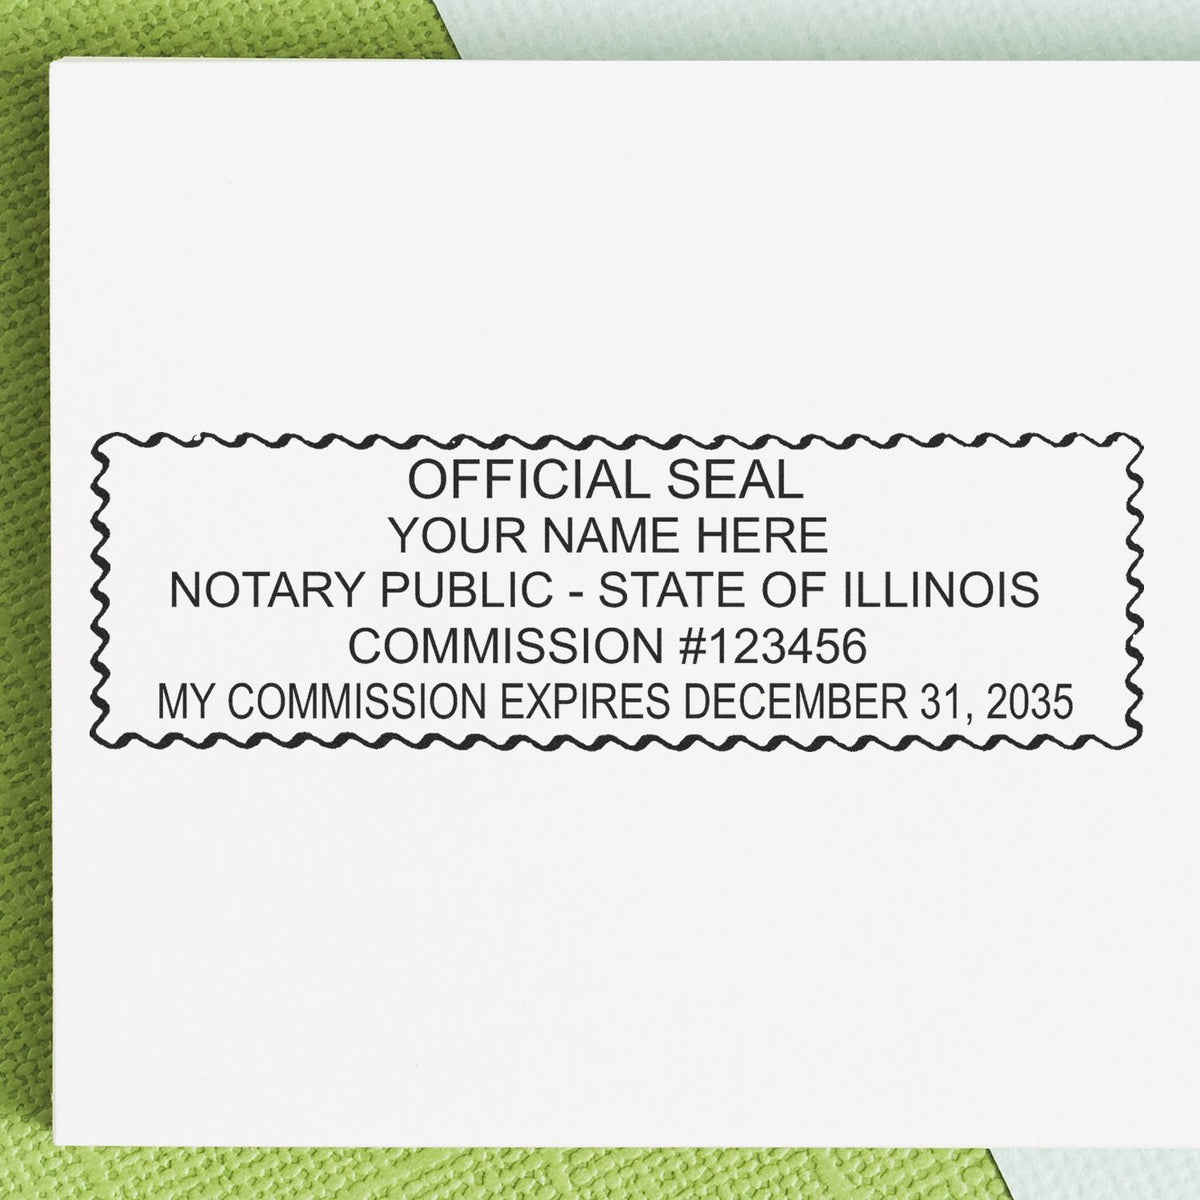 A photograph of the MaxLight Premium Pre-Inked Illinois Rectangular Notarial Stamp stamp impression reveals a vivid, professional image of the on paper.